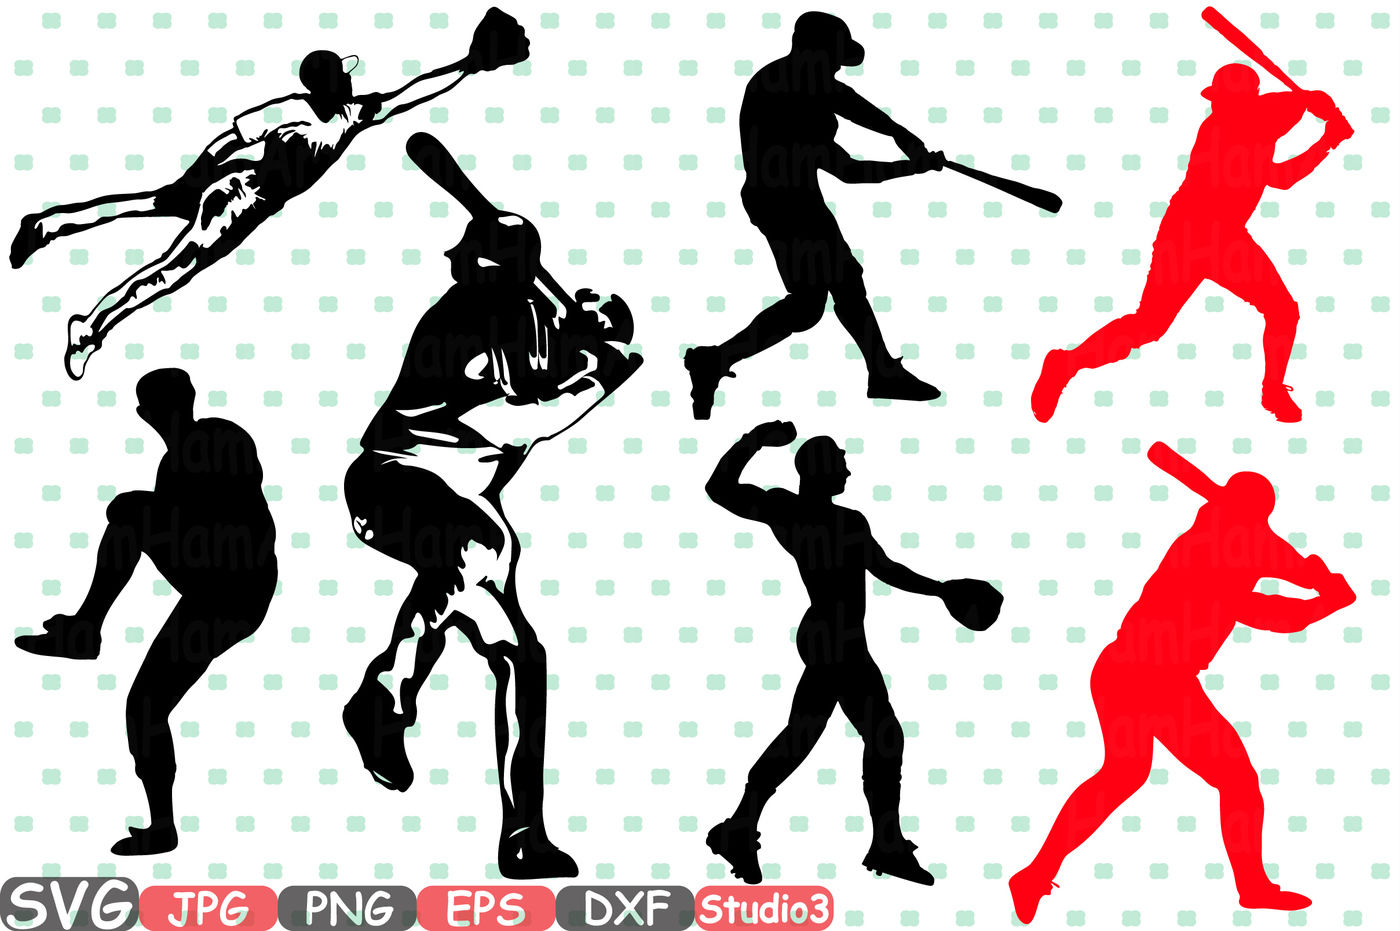 Download Baseball Player SVG Silhouette Cutting Files sign icons Cricut Design Ball Player Studio 3 cameo ...